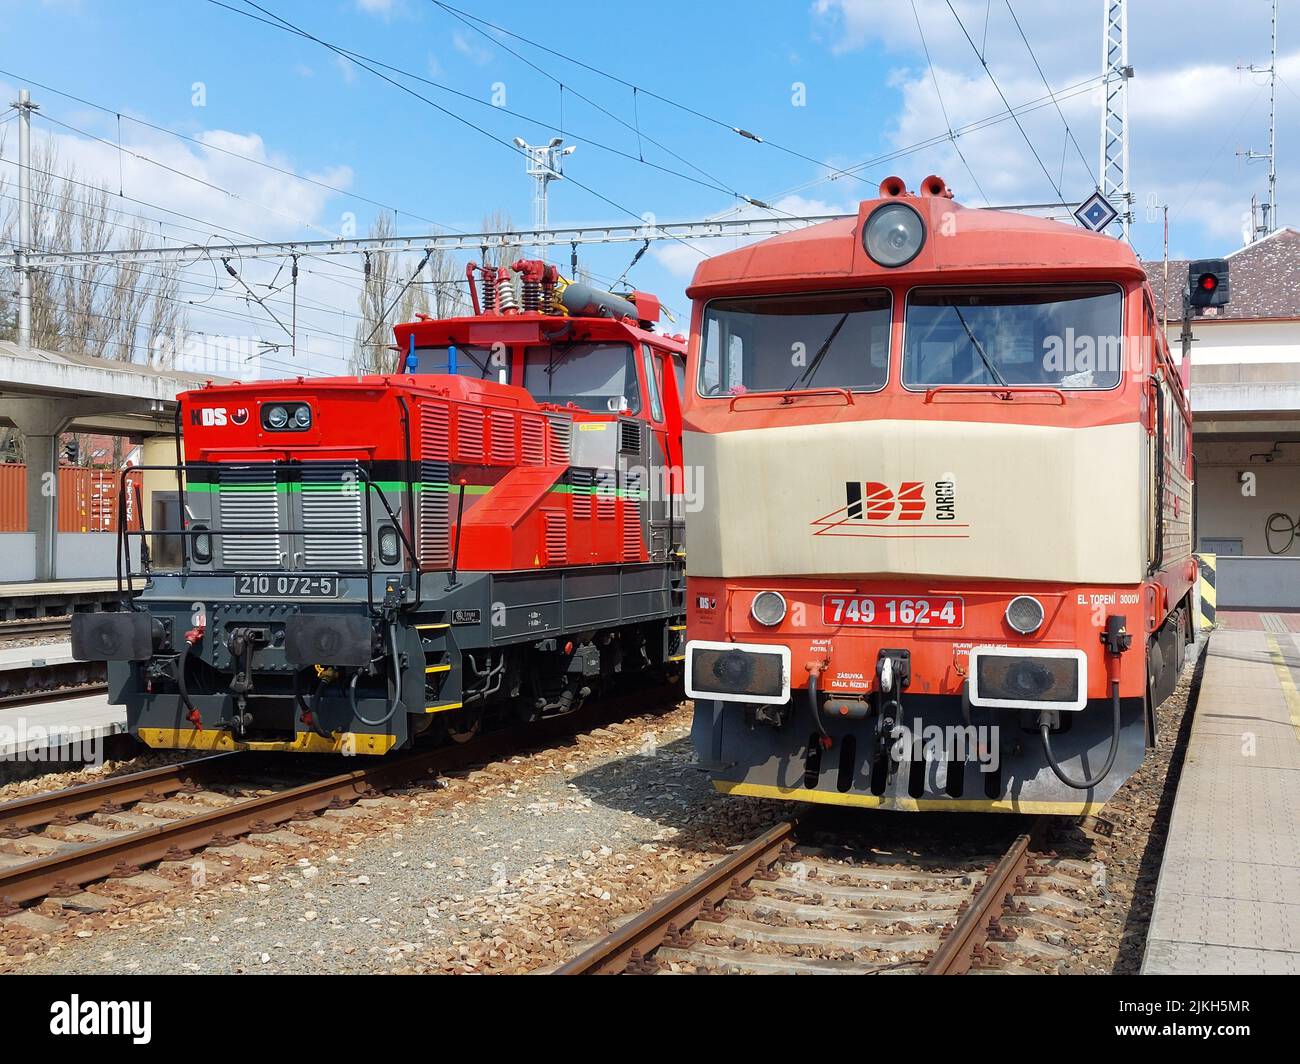 The Locomotive 749 162-4 and 749 181-4 and Locomotive 210 072-5 of IDS  Cargo train in Hodonin, Czech Republic Stock Photo - Alamy